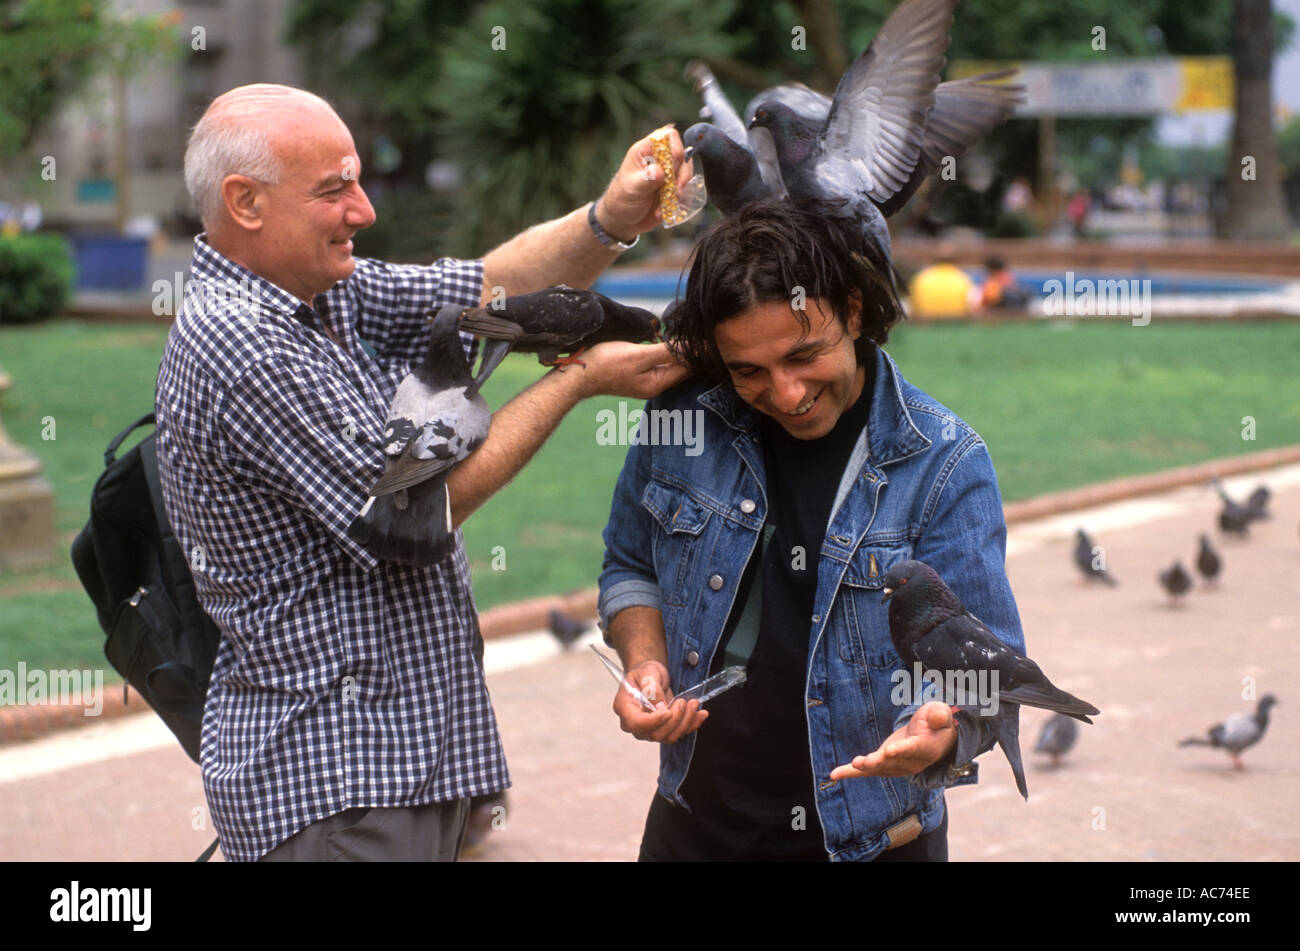 MEN FEEDING PIGEONS in PLAZA DE MAYO in the MICROCENTER district BUENOS AIRES ARGENTINA Stock Photo